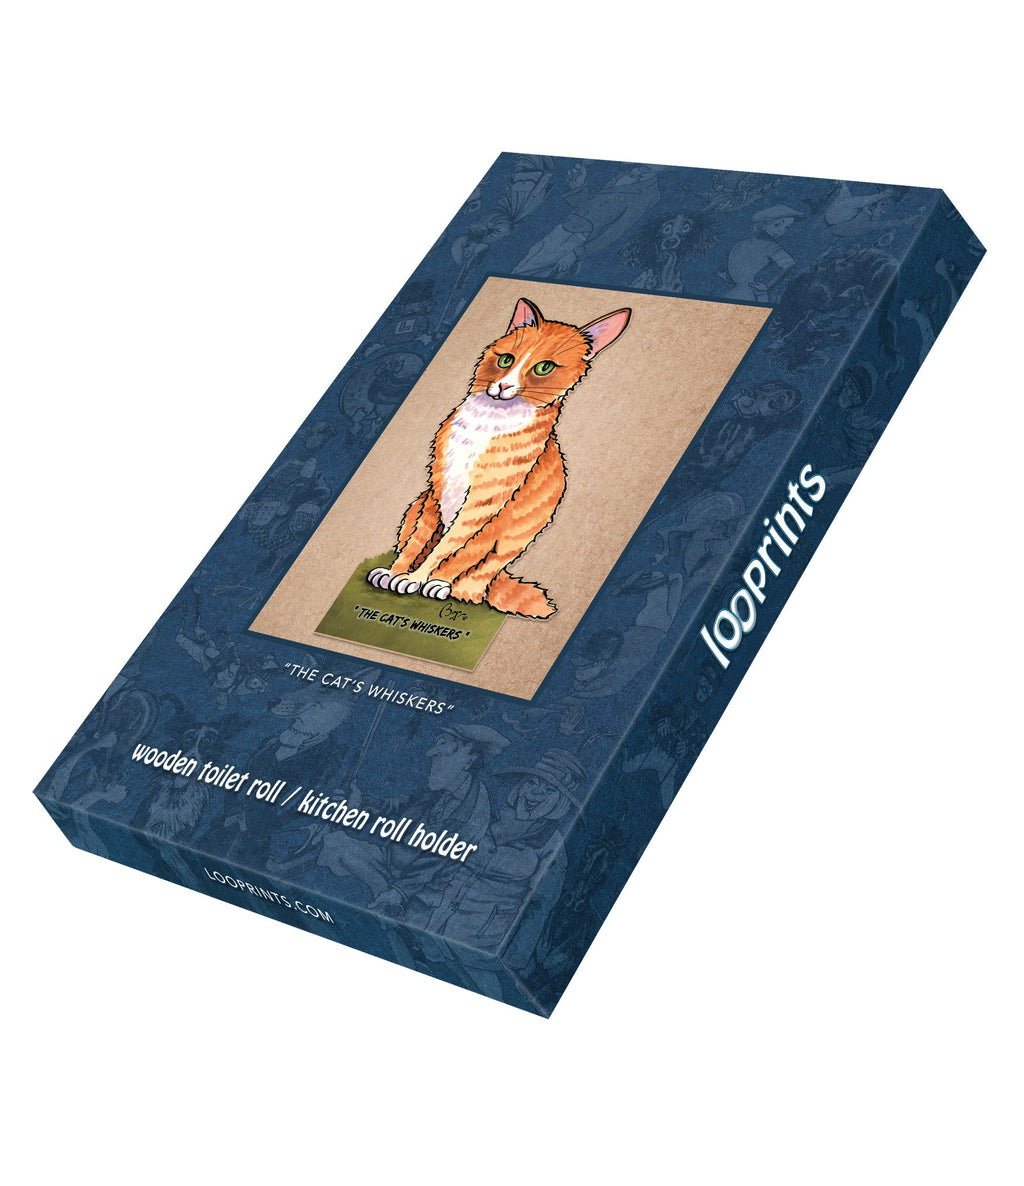 Cat's Whiskers ( Bryn Parry )-Printed Wood Toilet Roll / Kitchen Roll Holder. BOX OF 5 UNITS